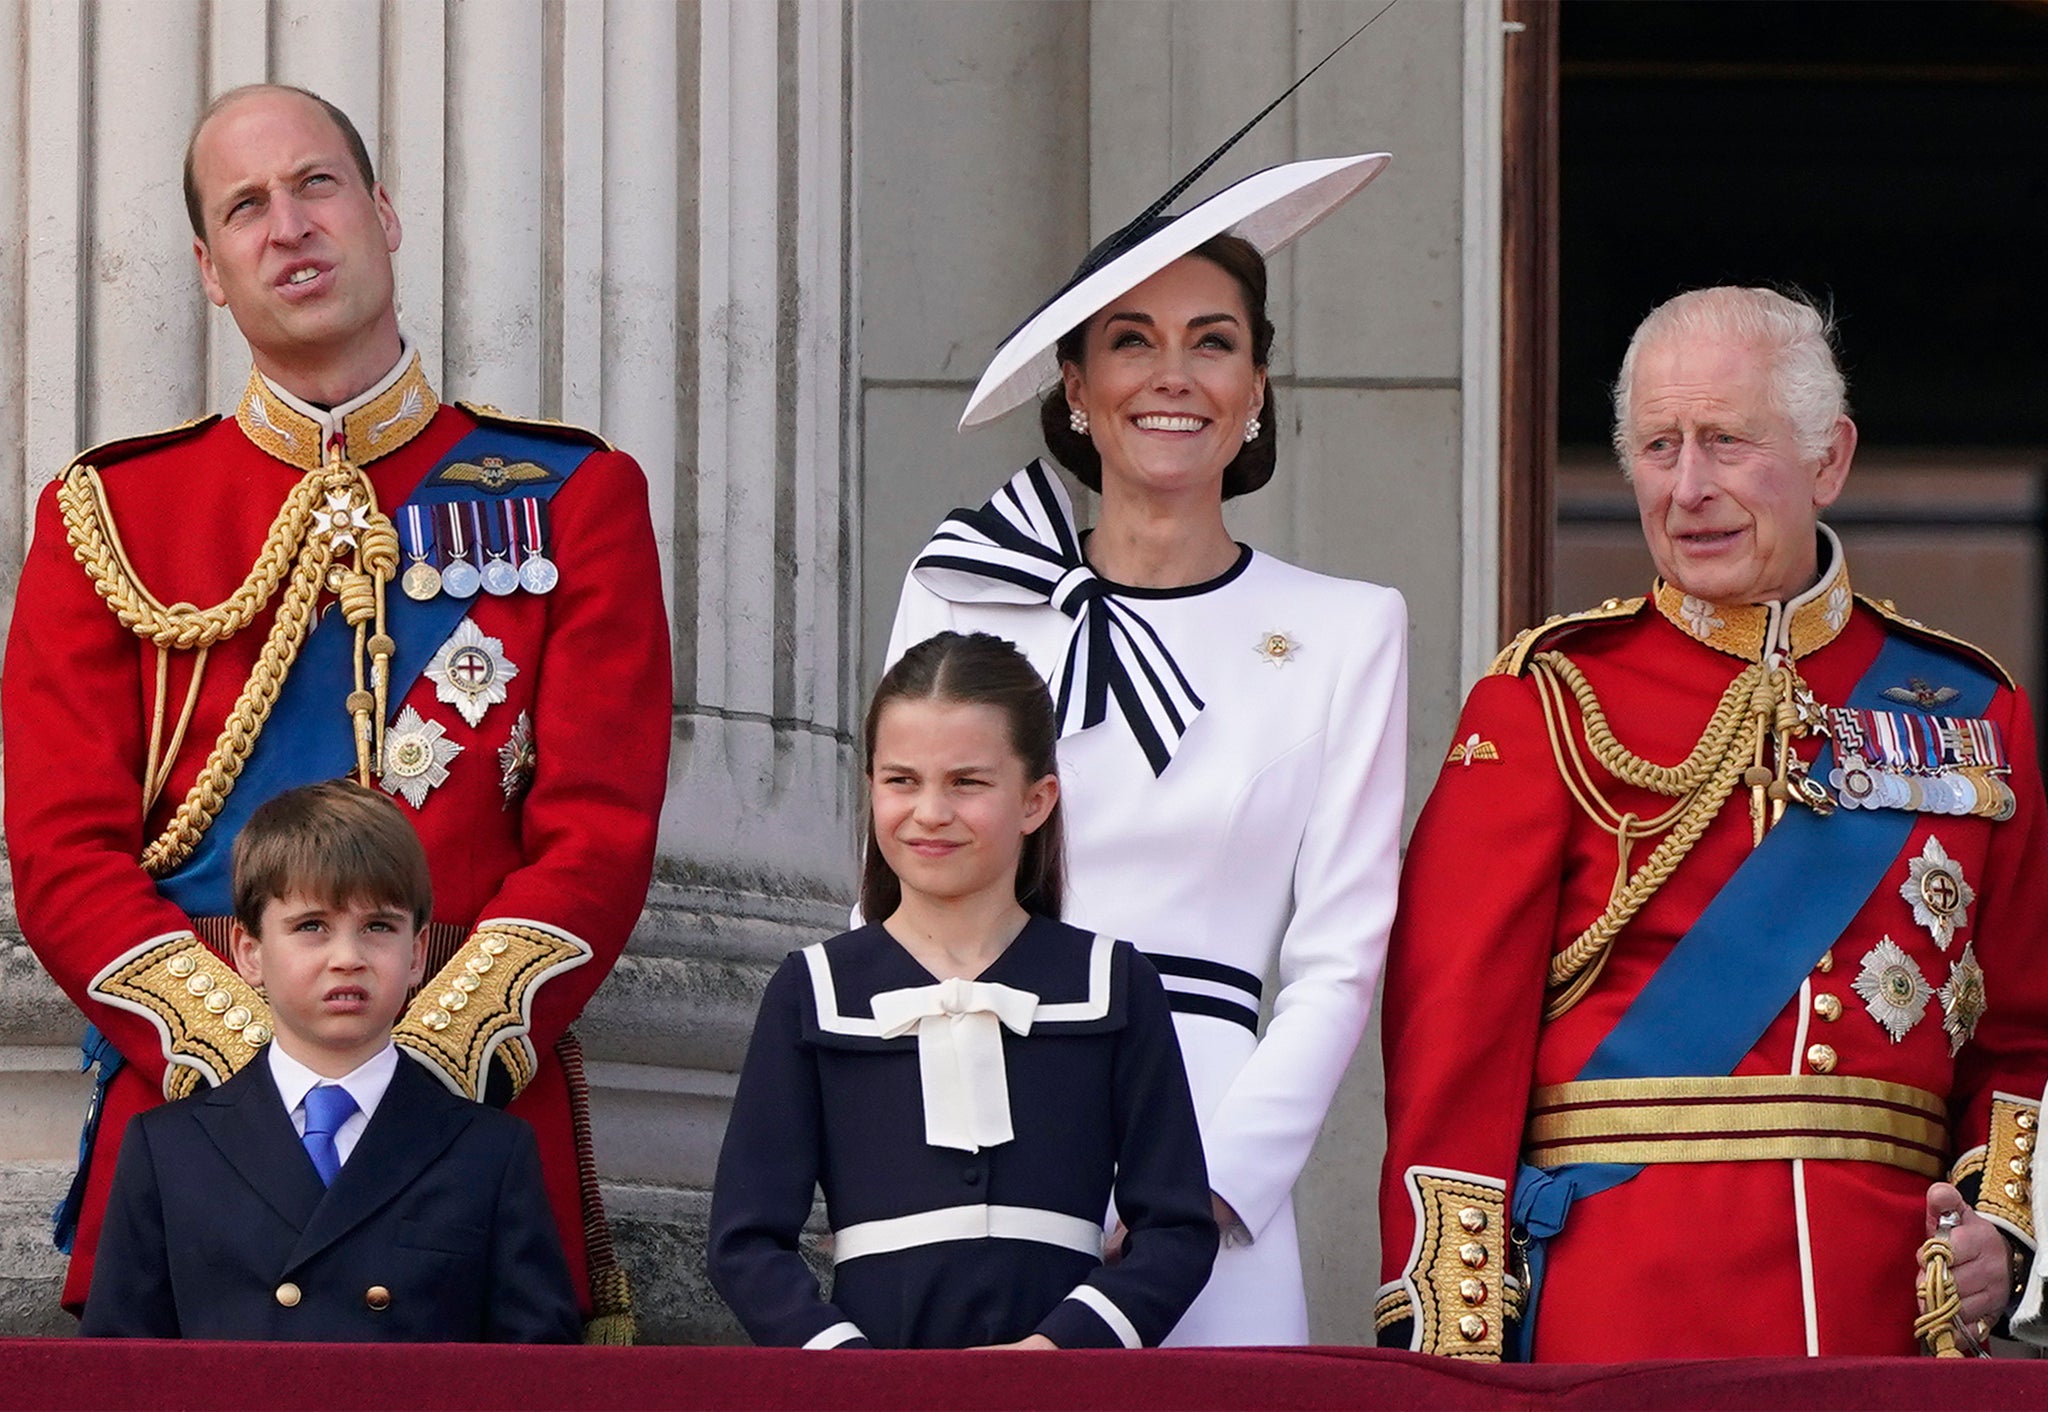 Prince William with his wife and father during yesterday’s Trooping the Colour